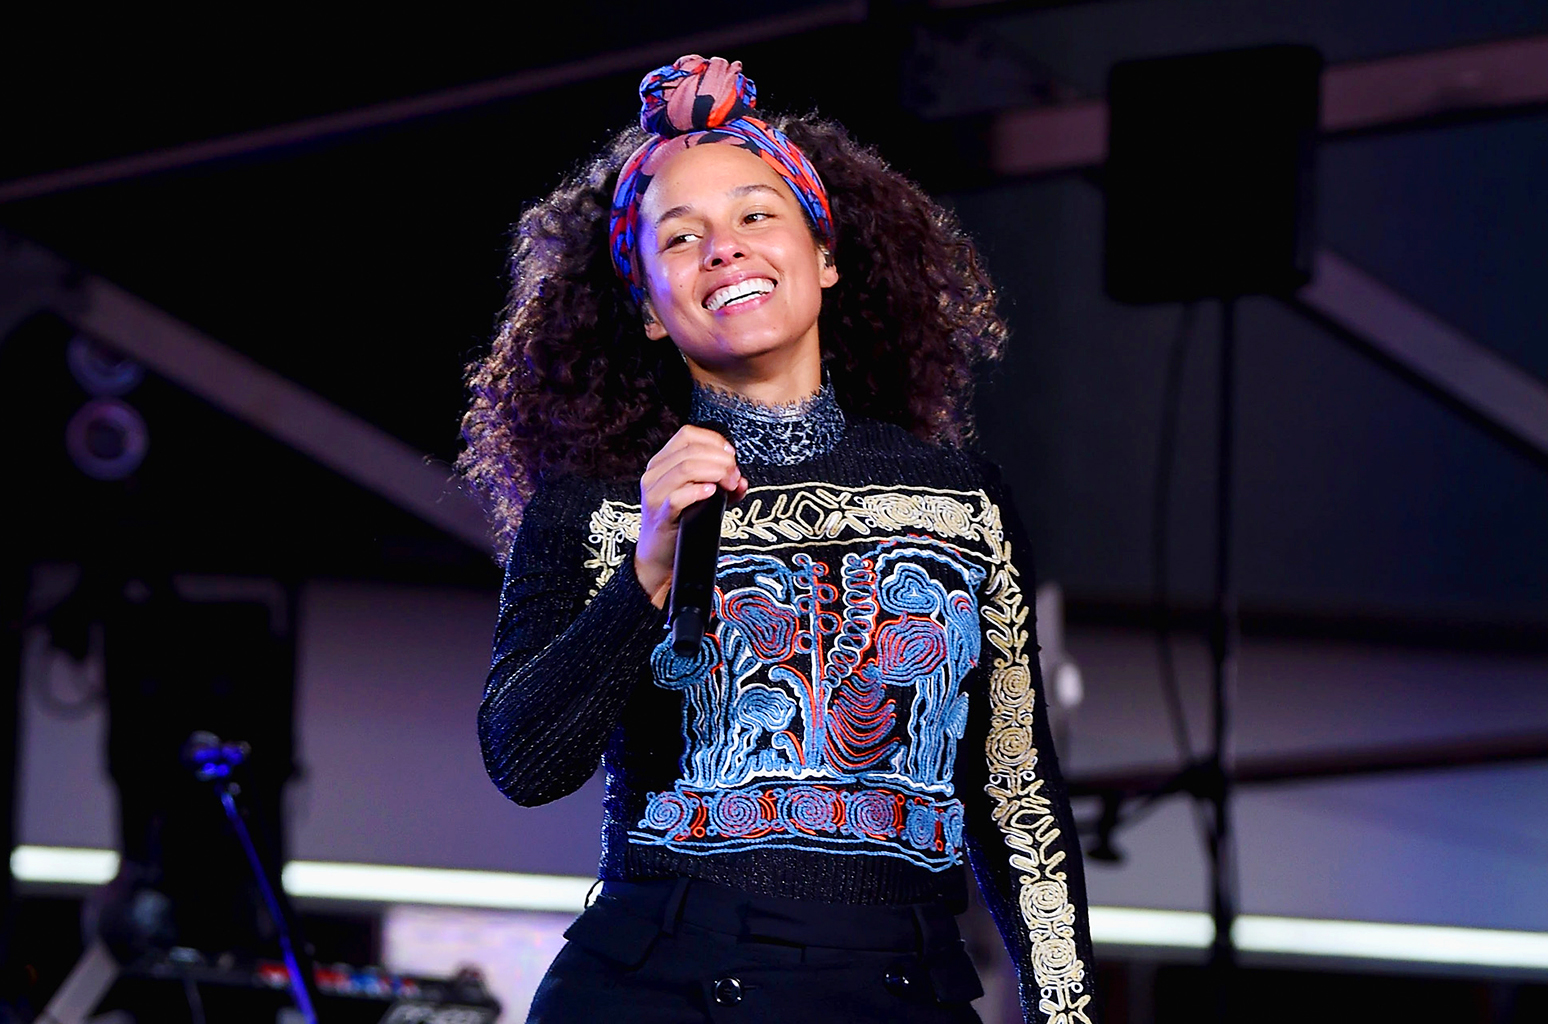 Alicia Keys Surprise Concert in Times Square